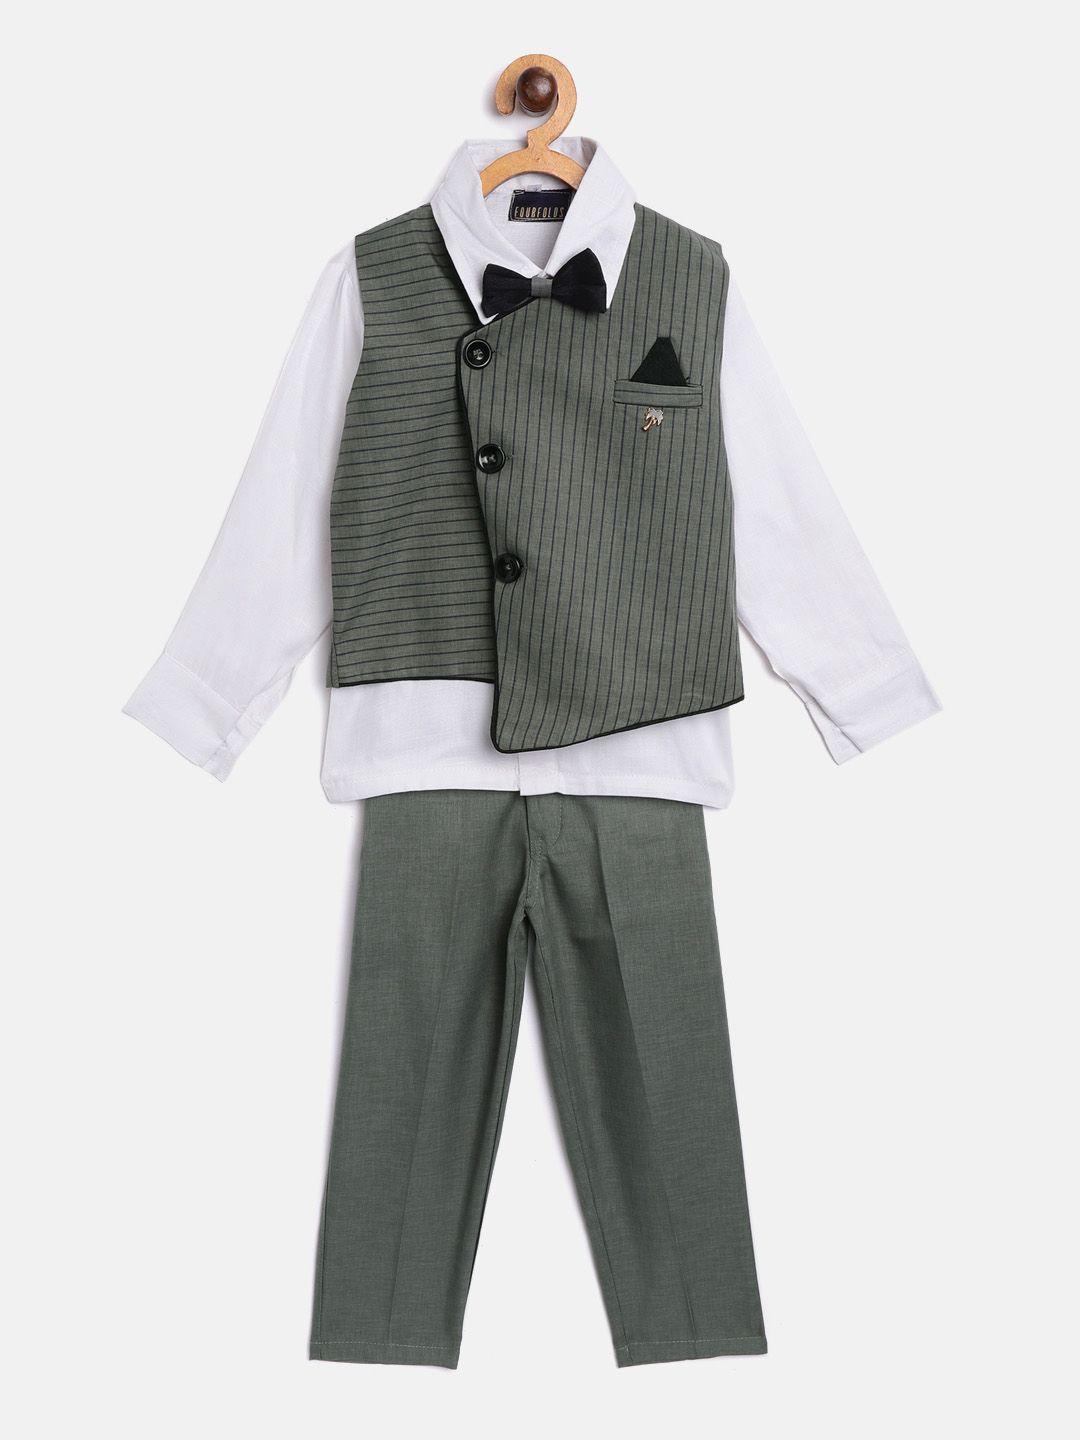 FOURFOLDS Boys White & Olive Green Solid Clothing Set with Waistcoat & Bow